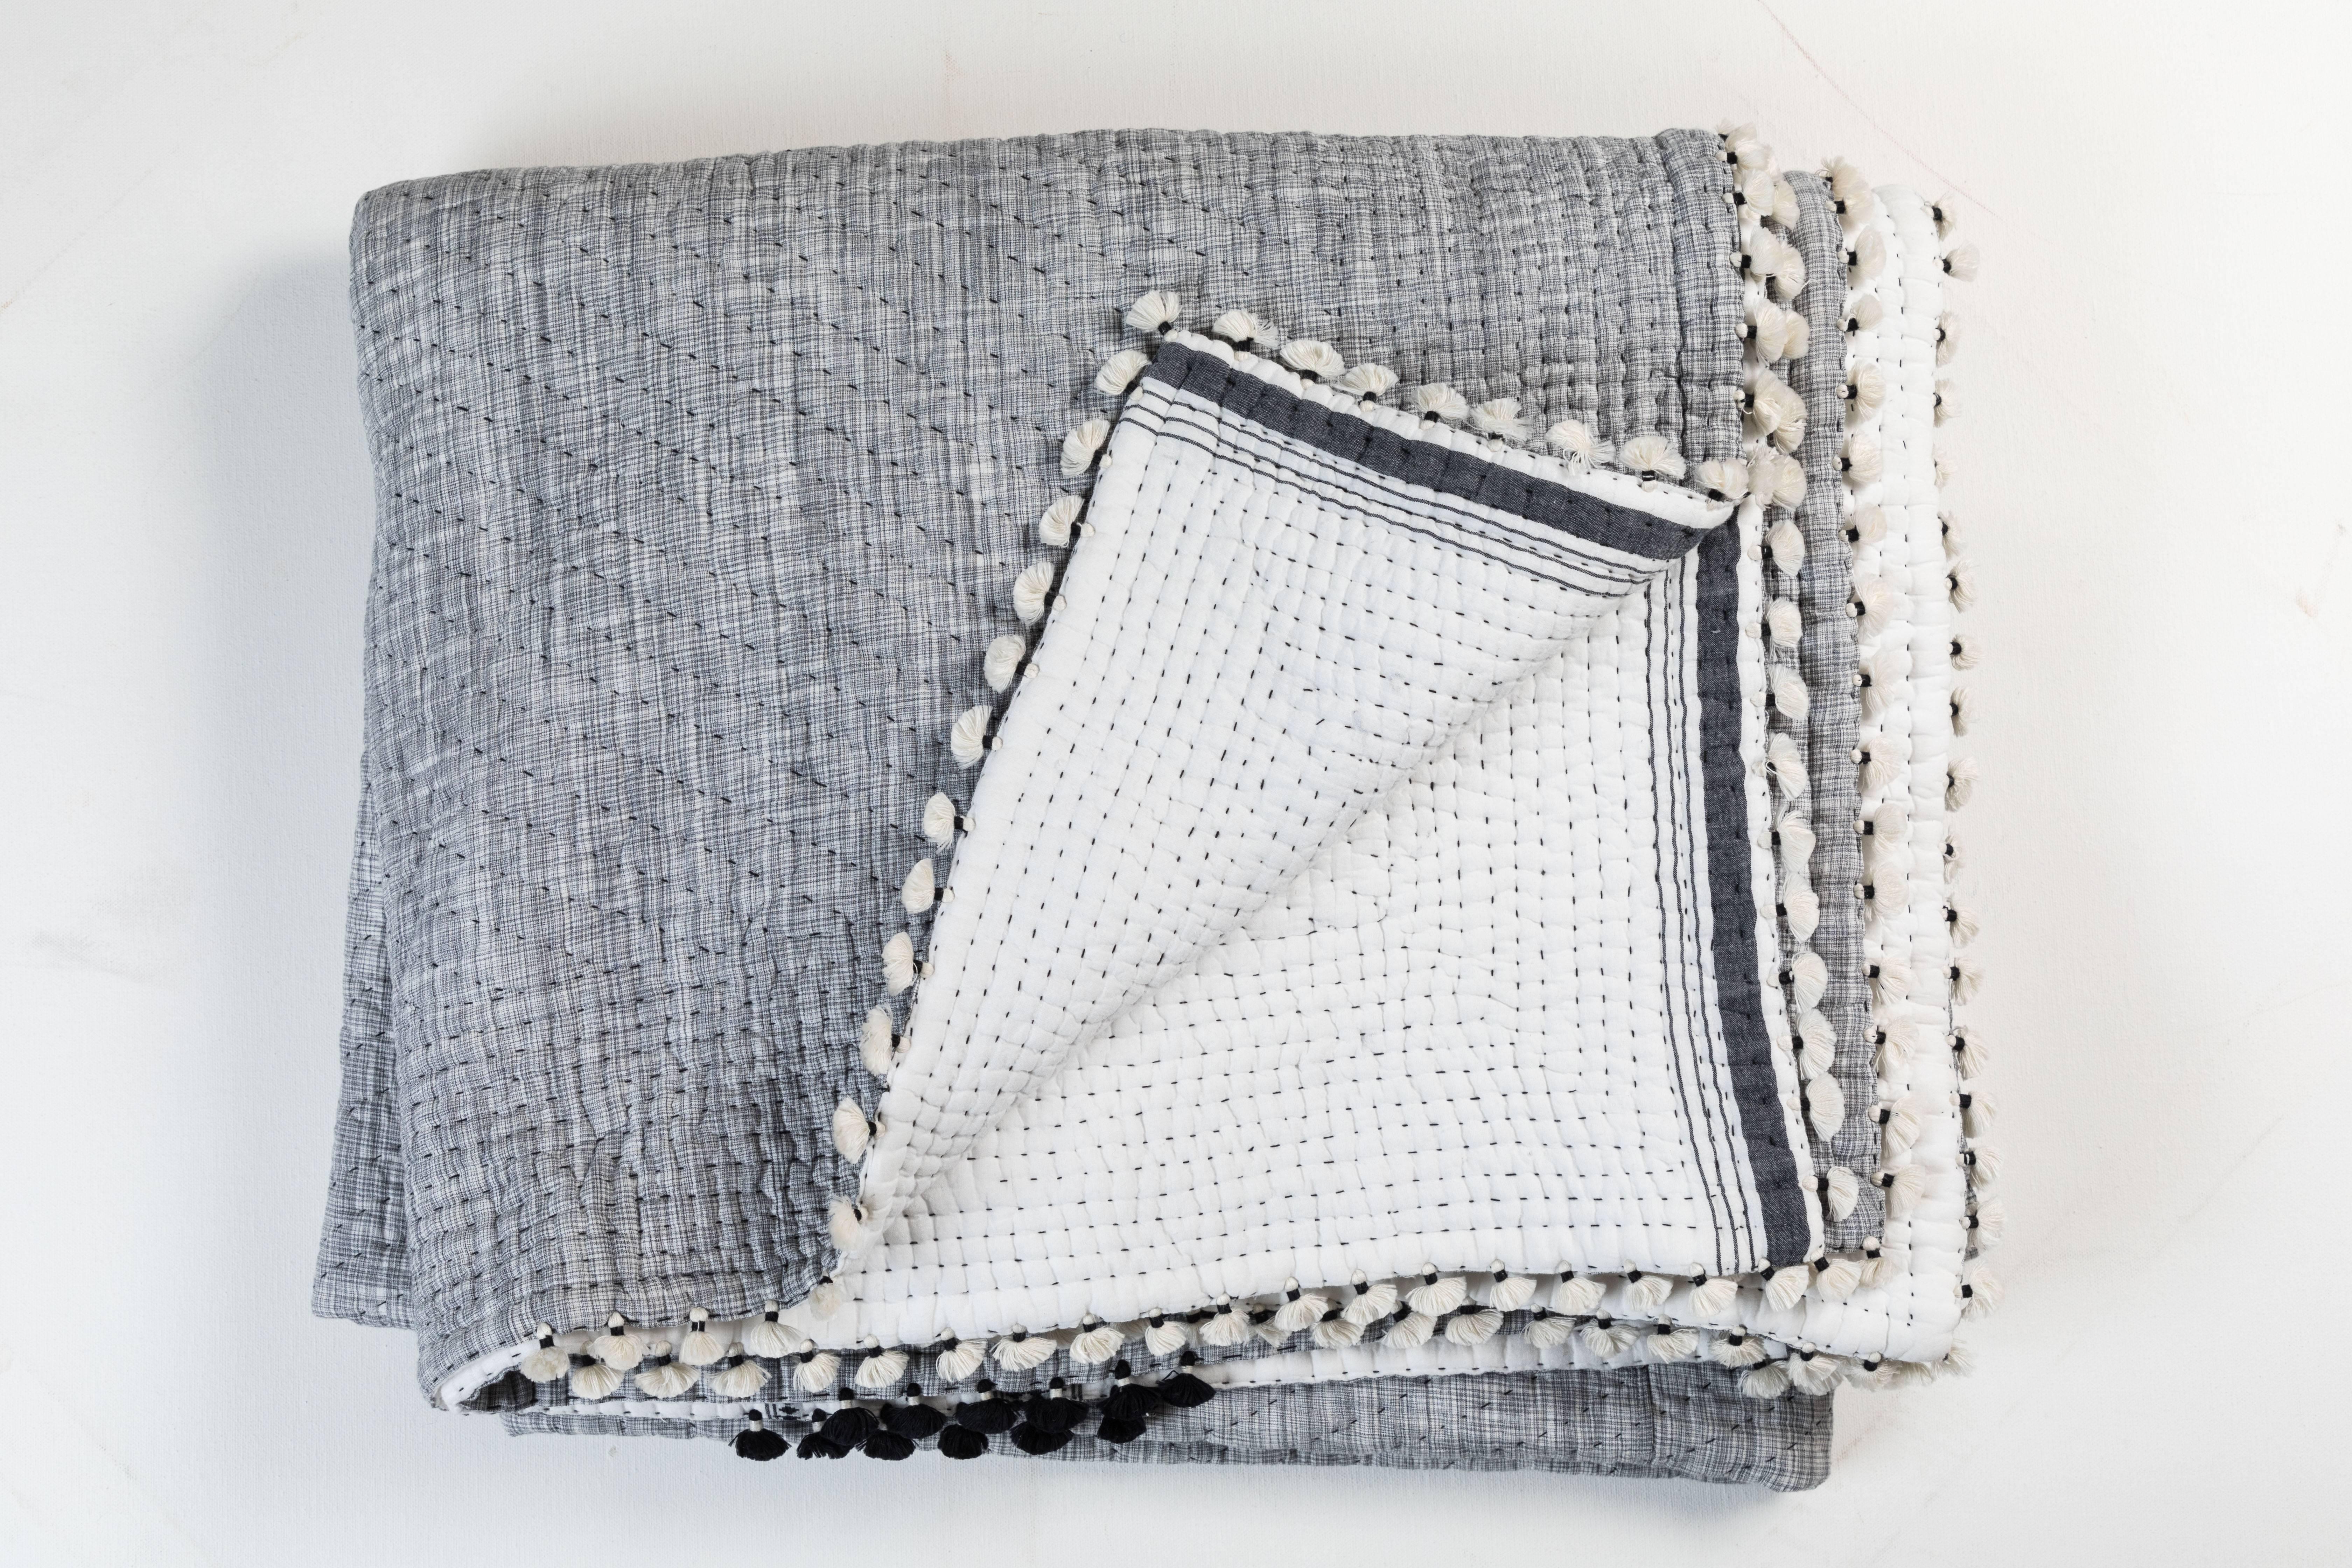 Kala naturally dyed organic cotton from Gujarat, India. Hand-loomed using traditional Indian textile techniques to produce extra weft woven stripes and plaids. This grey, white and black hand stitched quilt has added hand-knotted tassels.       